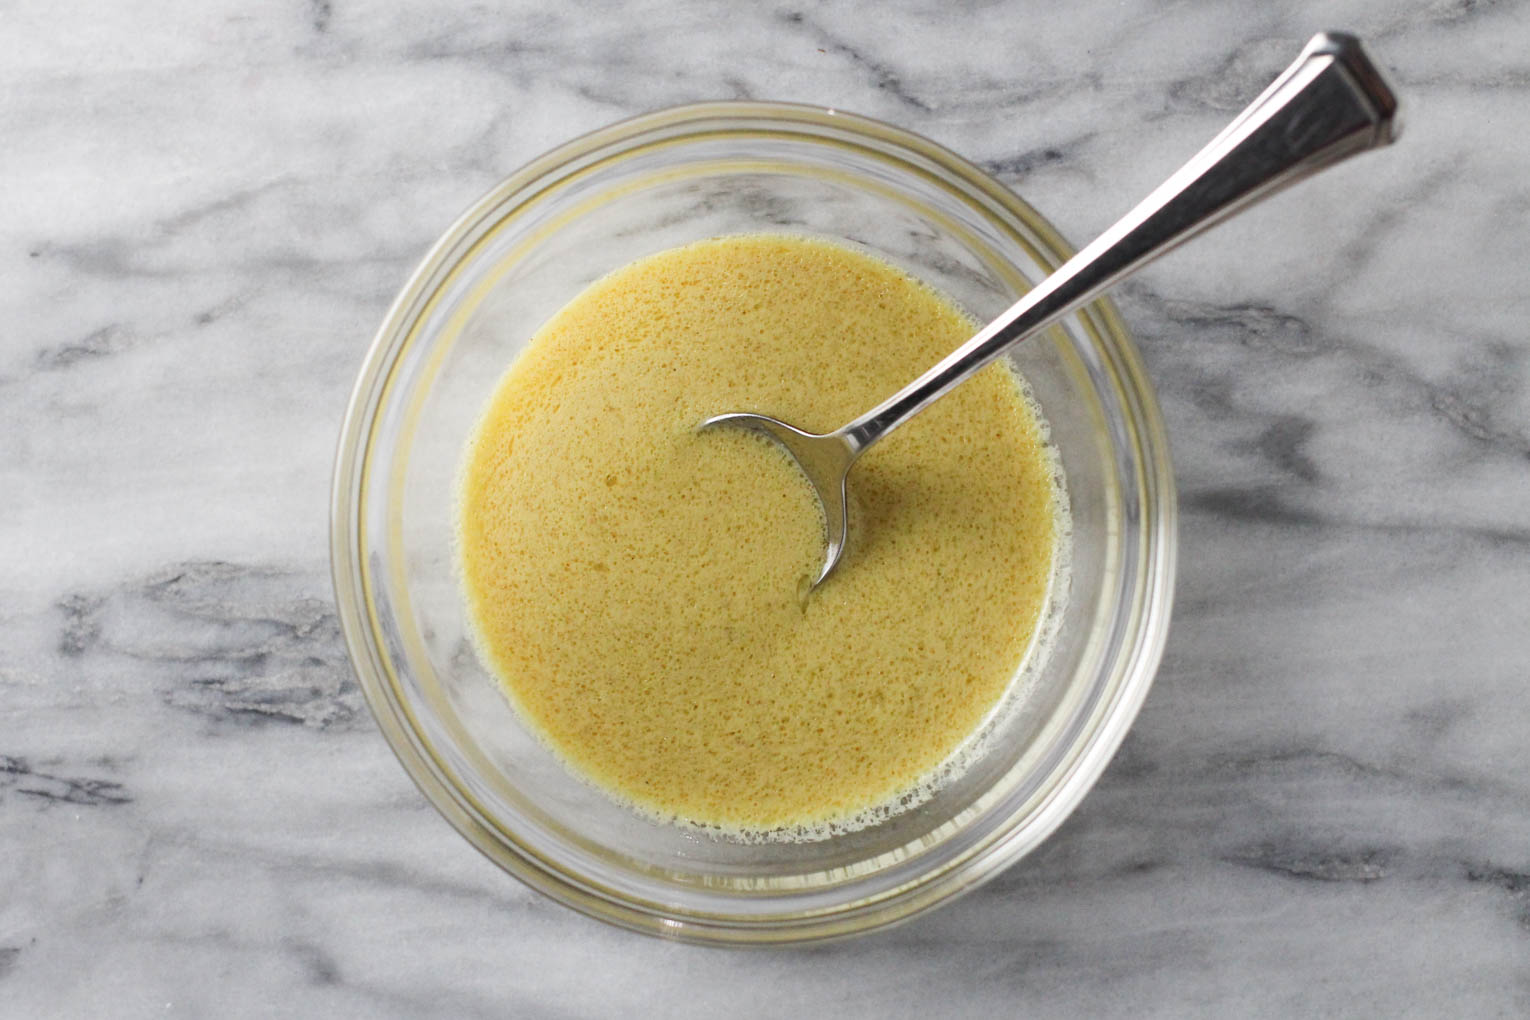 Dijon mustard vinaigrette in a small bowl standing on a marble background. There is a spoon in the bowl.